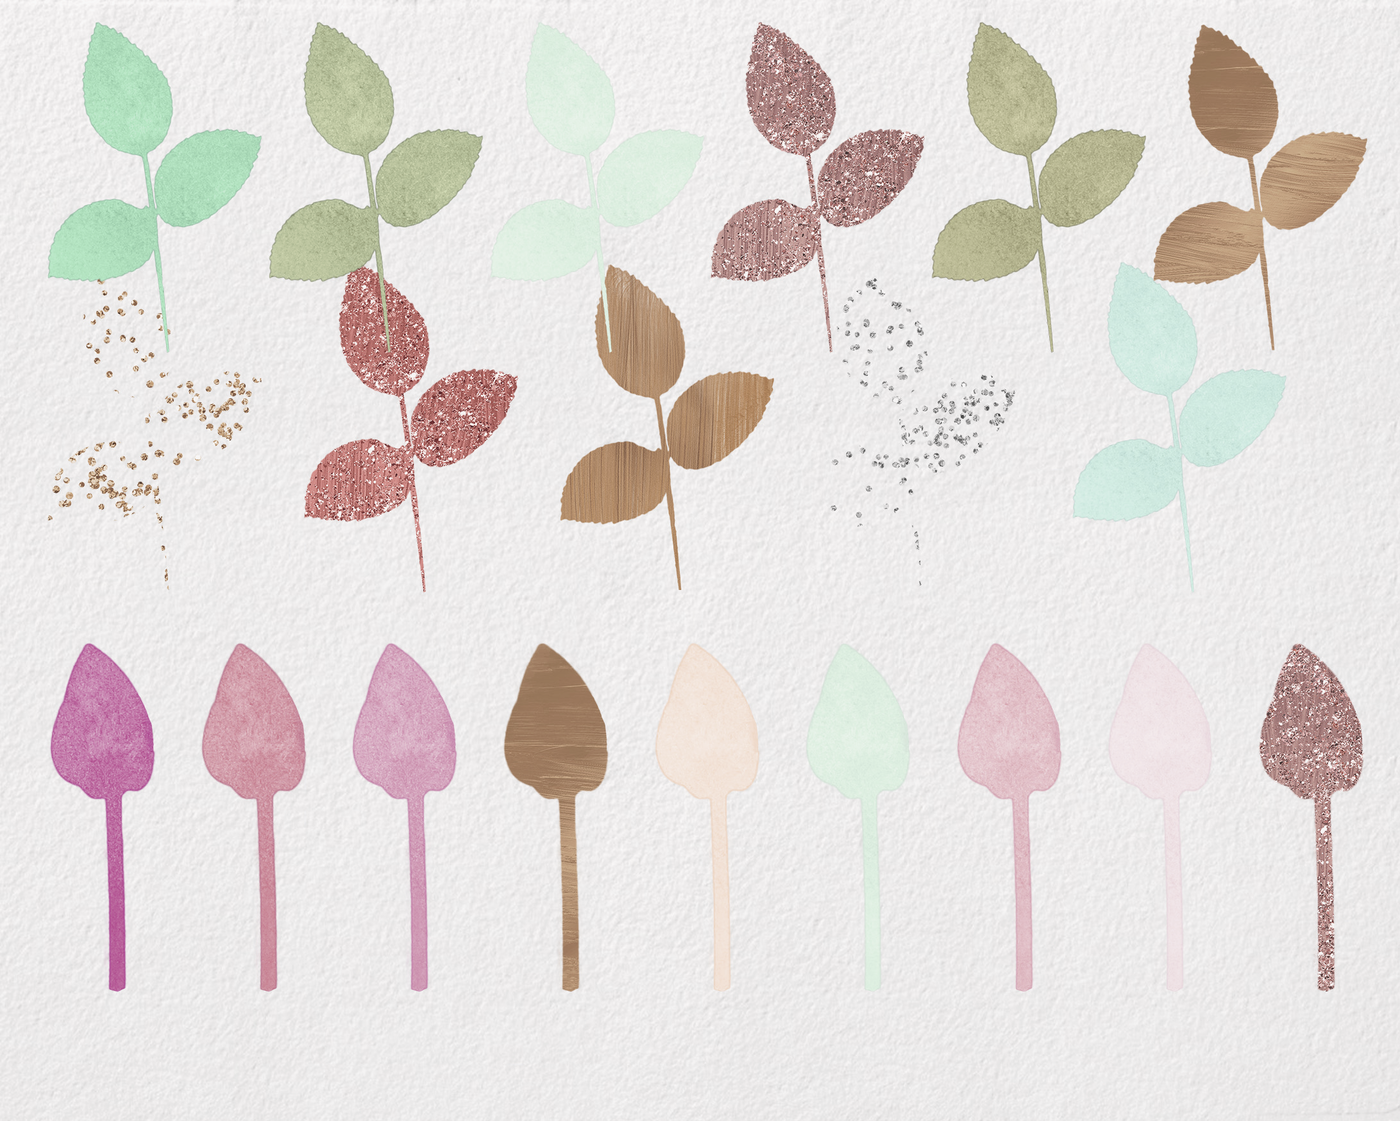 Download Watercolor Roses Floral Clipart Set in Blush Pink, Mint ...